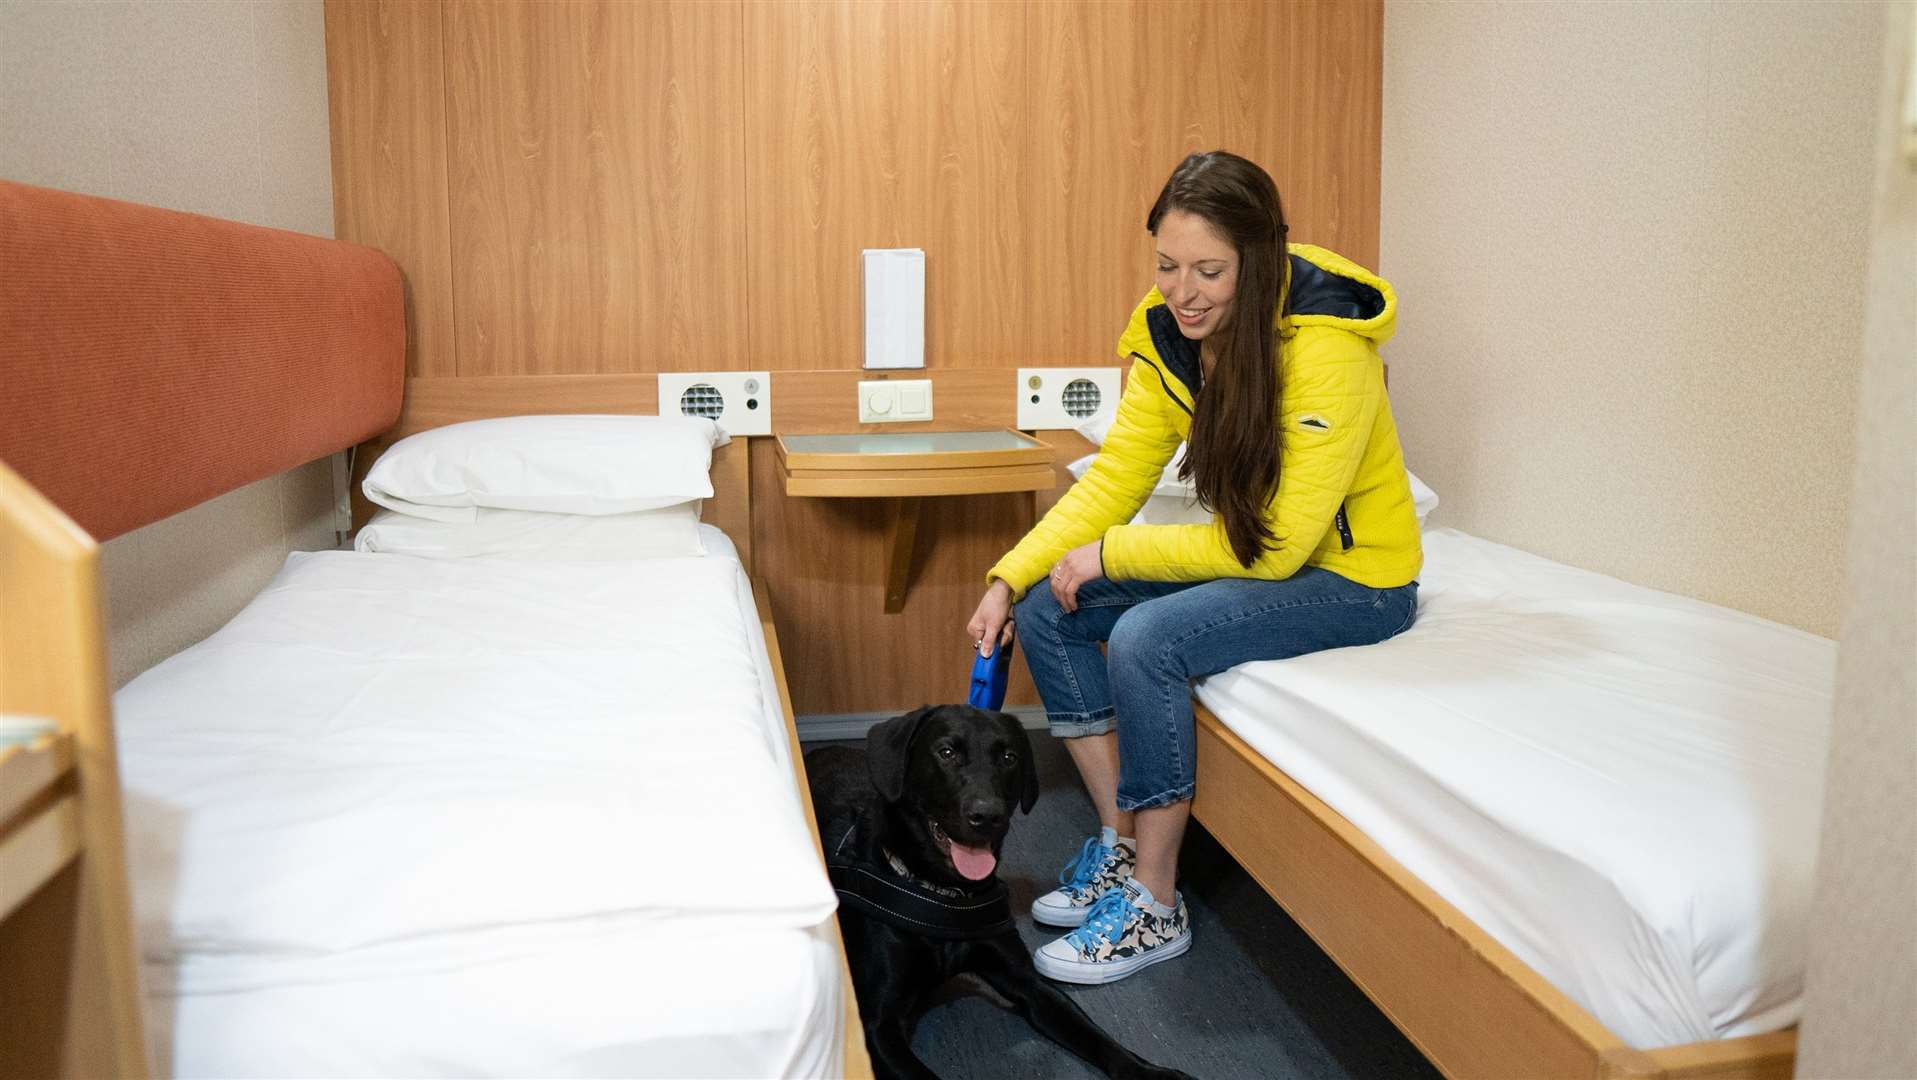 NorthLink has introduced pet-friendly cabins across its passenger vessels.